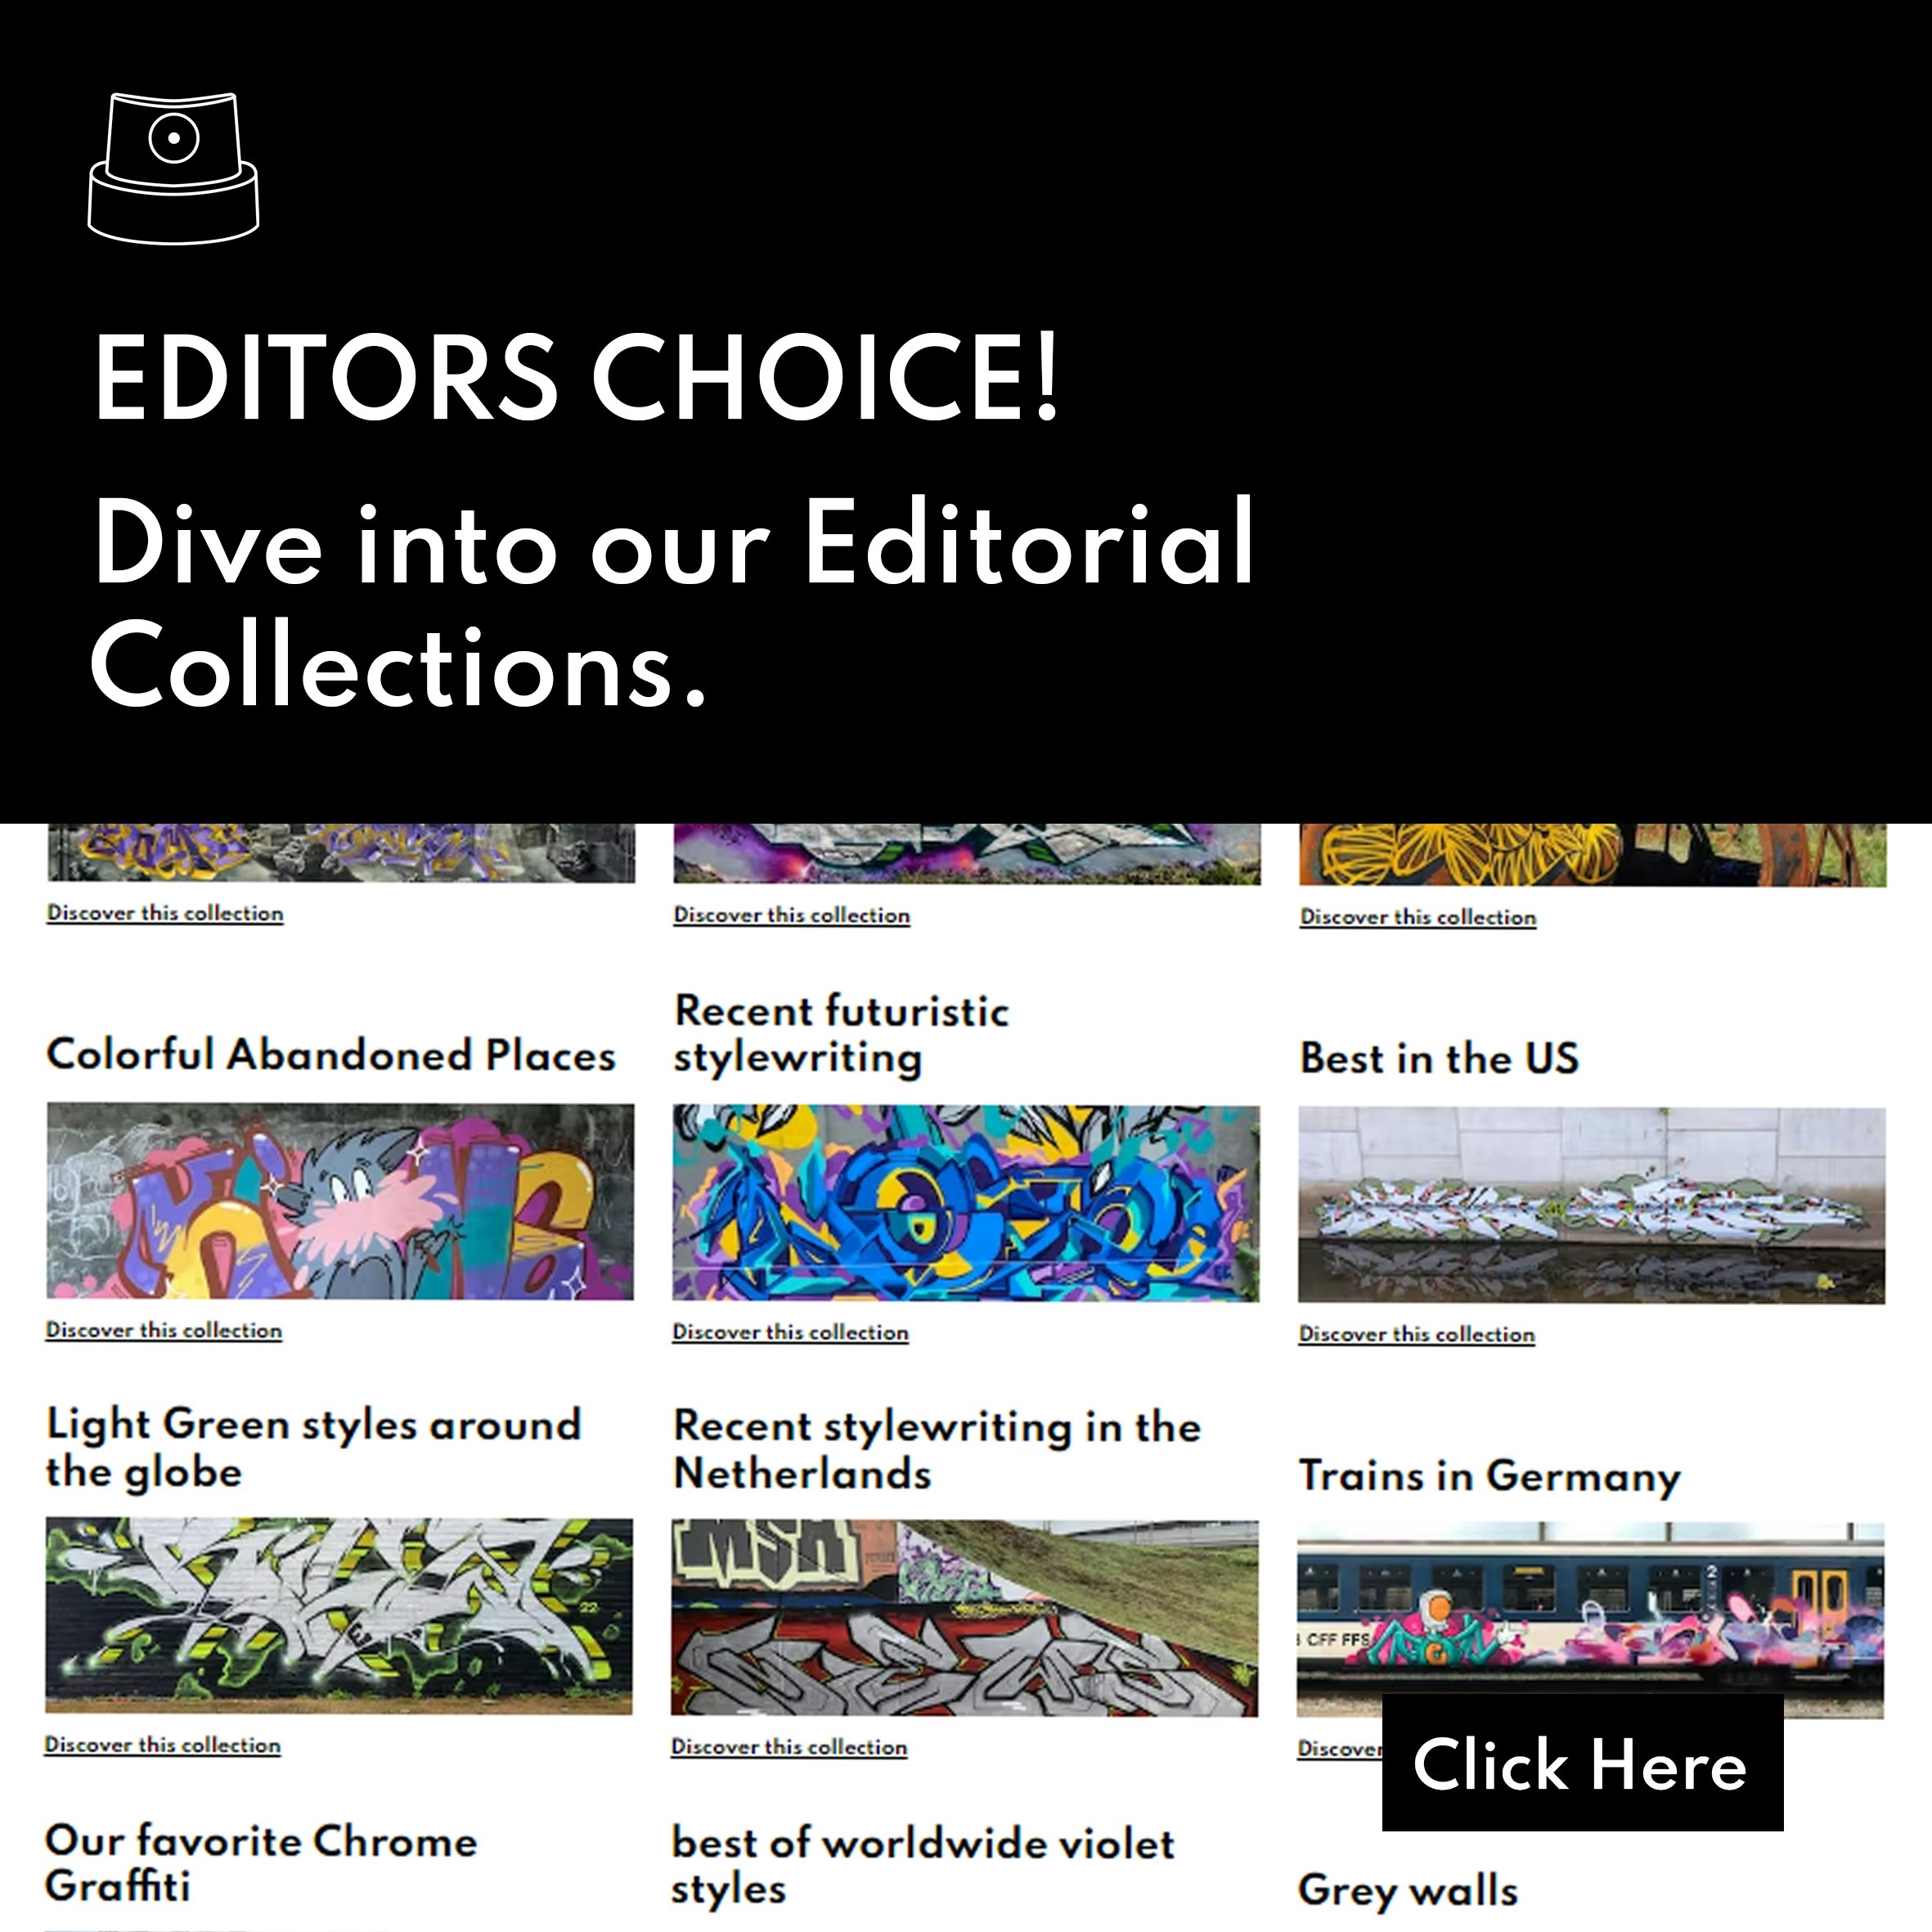 EDITORIAL COLLECTIONS